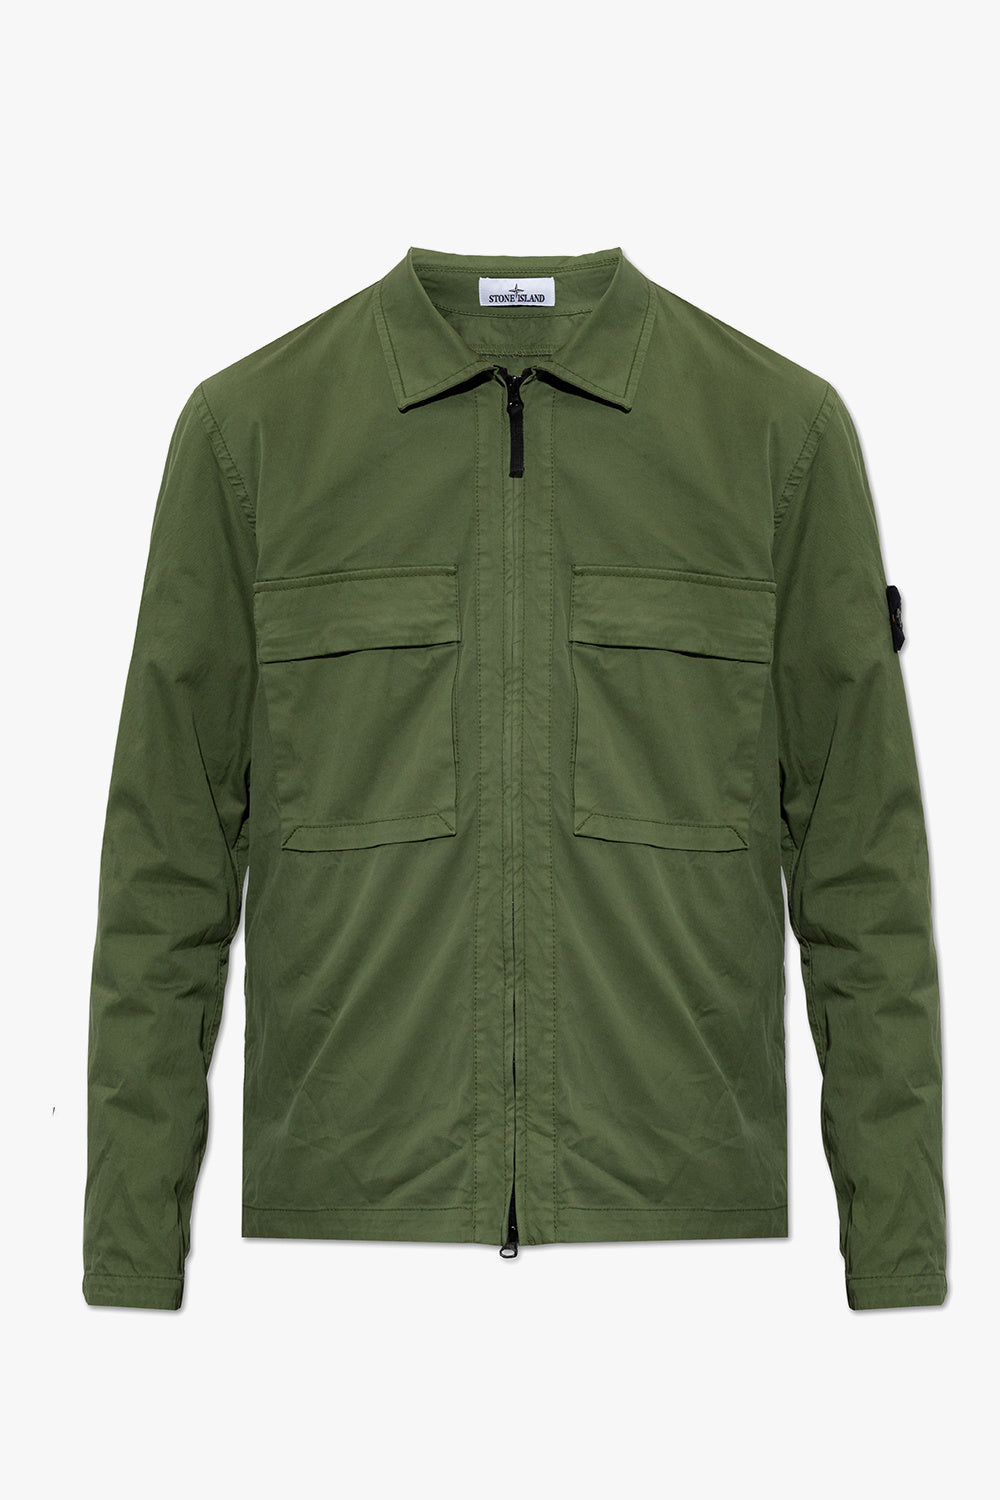 Stone Island Double chest pocket over shirt